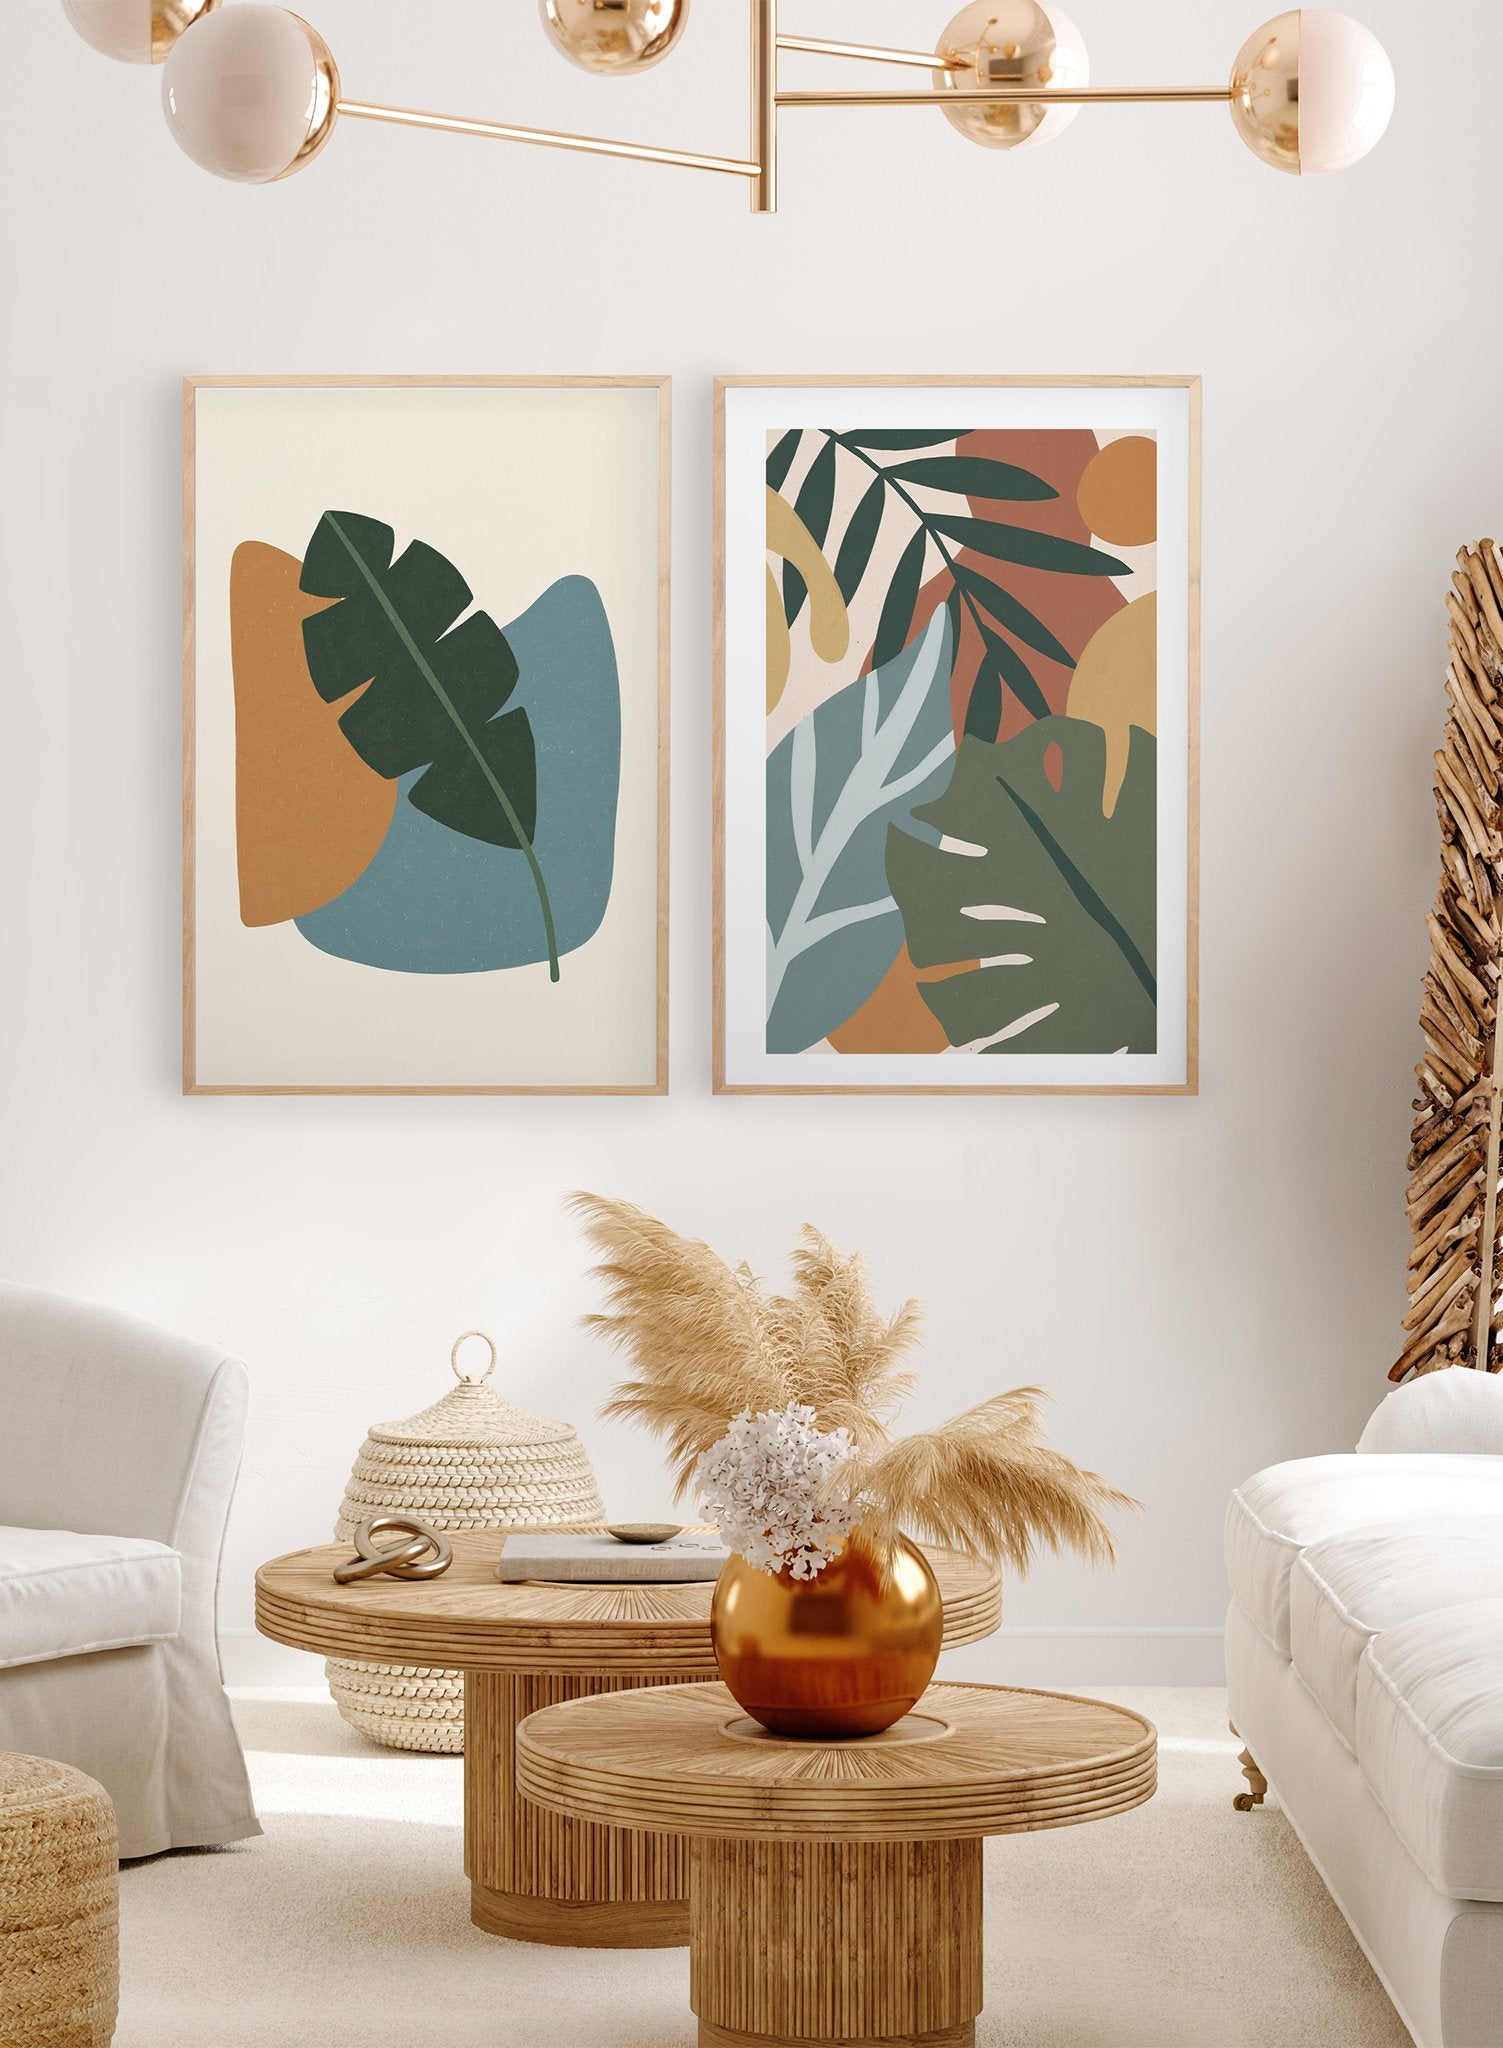 Vibrant Herborium is a minimalist illustration of colourful leaves coming from different plants superposed on top of each other by Opposite Wall.